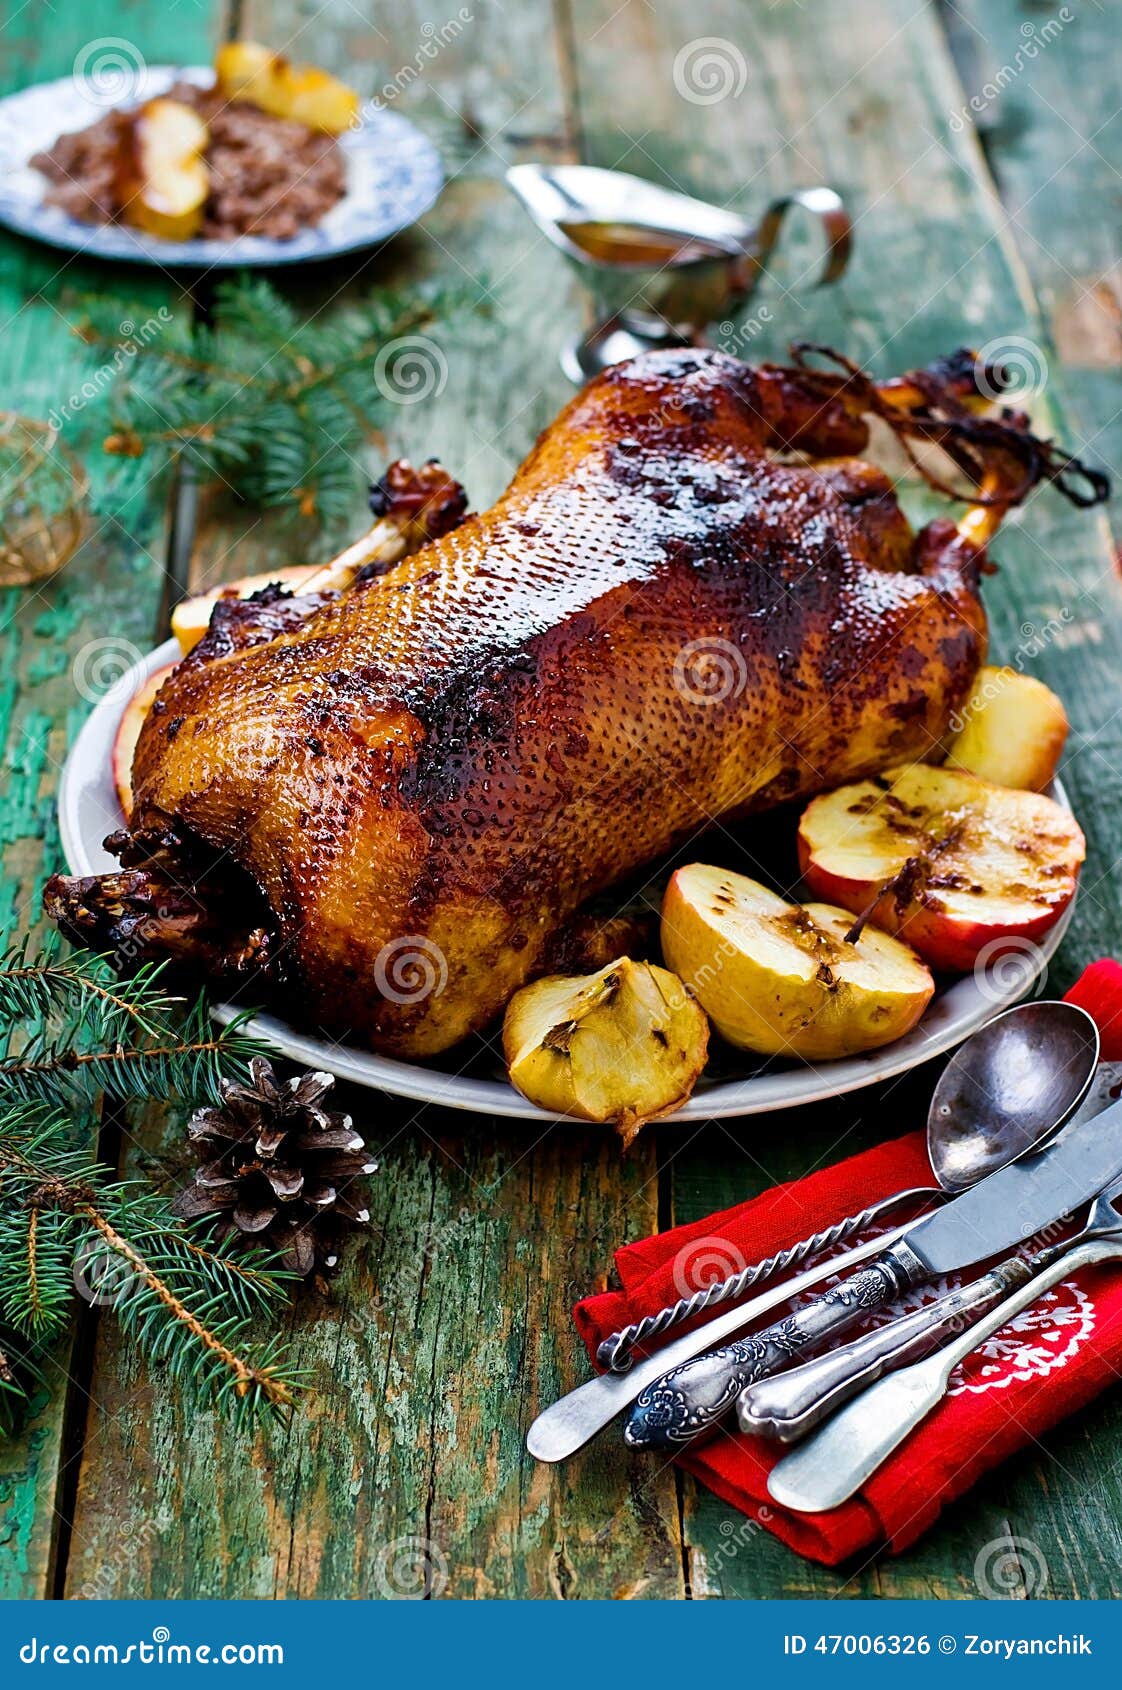 The Christmas Baked Goose with Apples Stock Photo - Image of apple ...